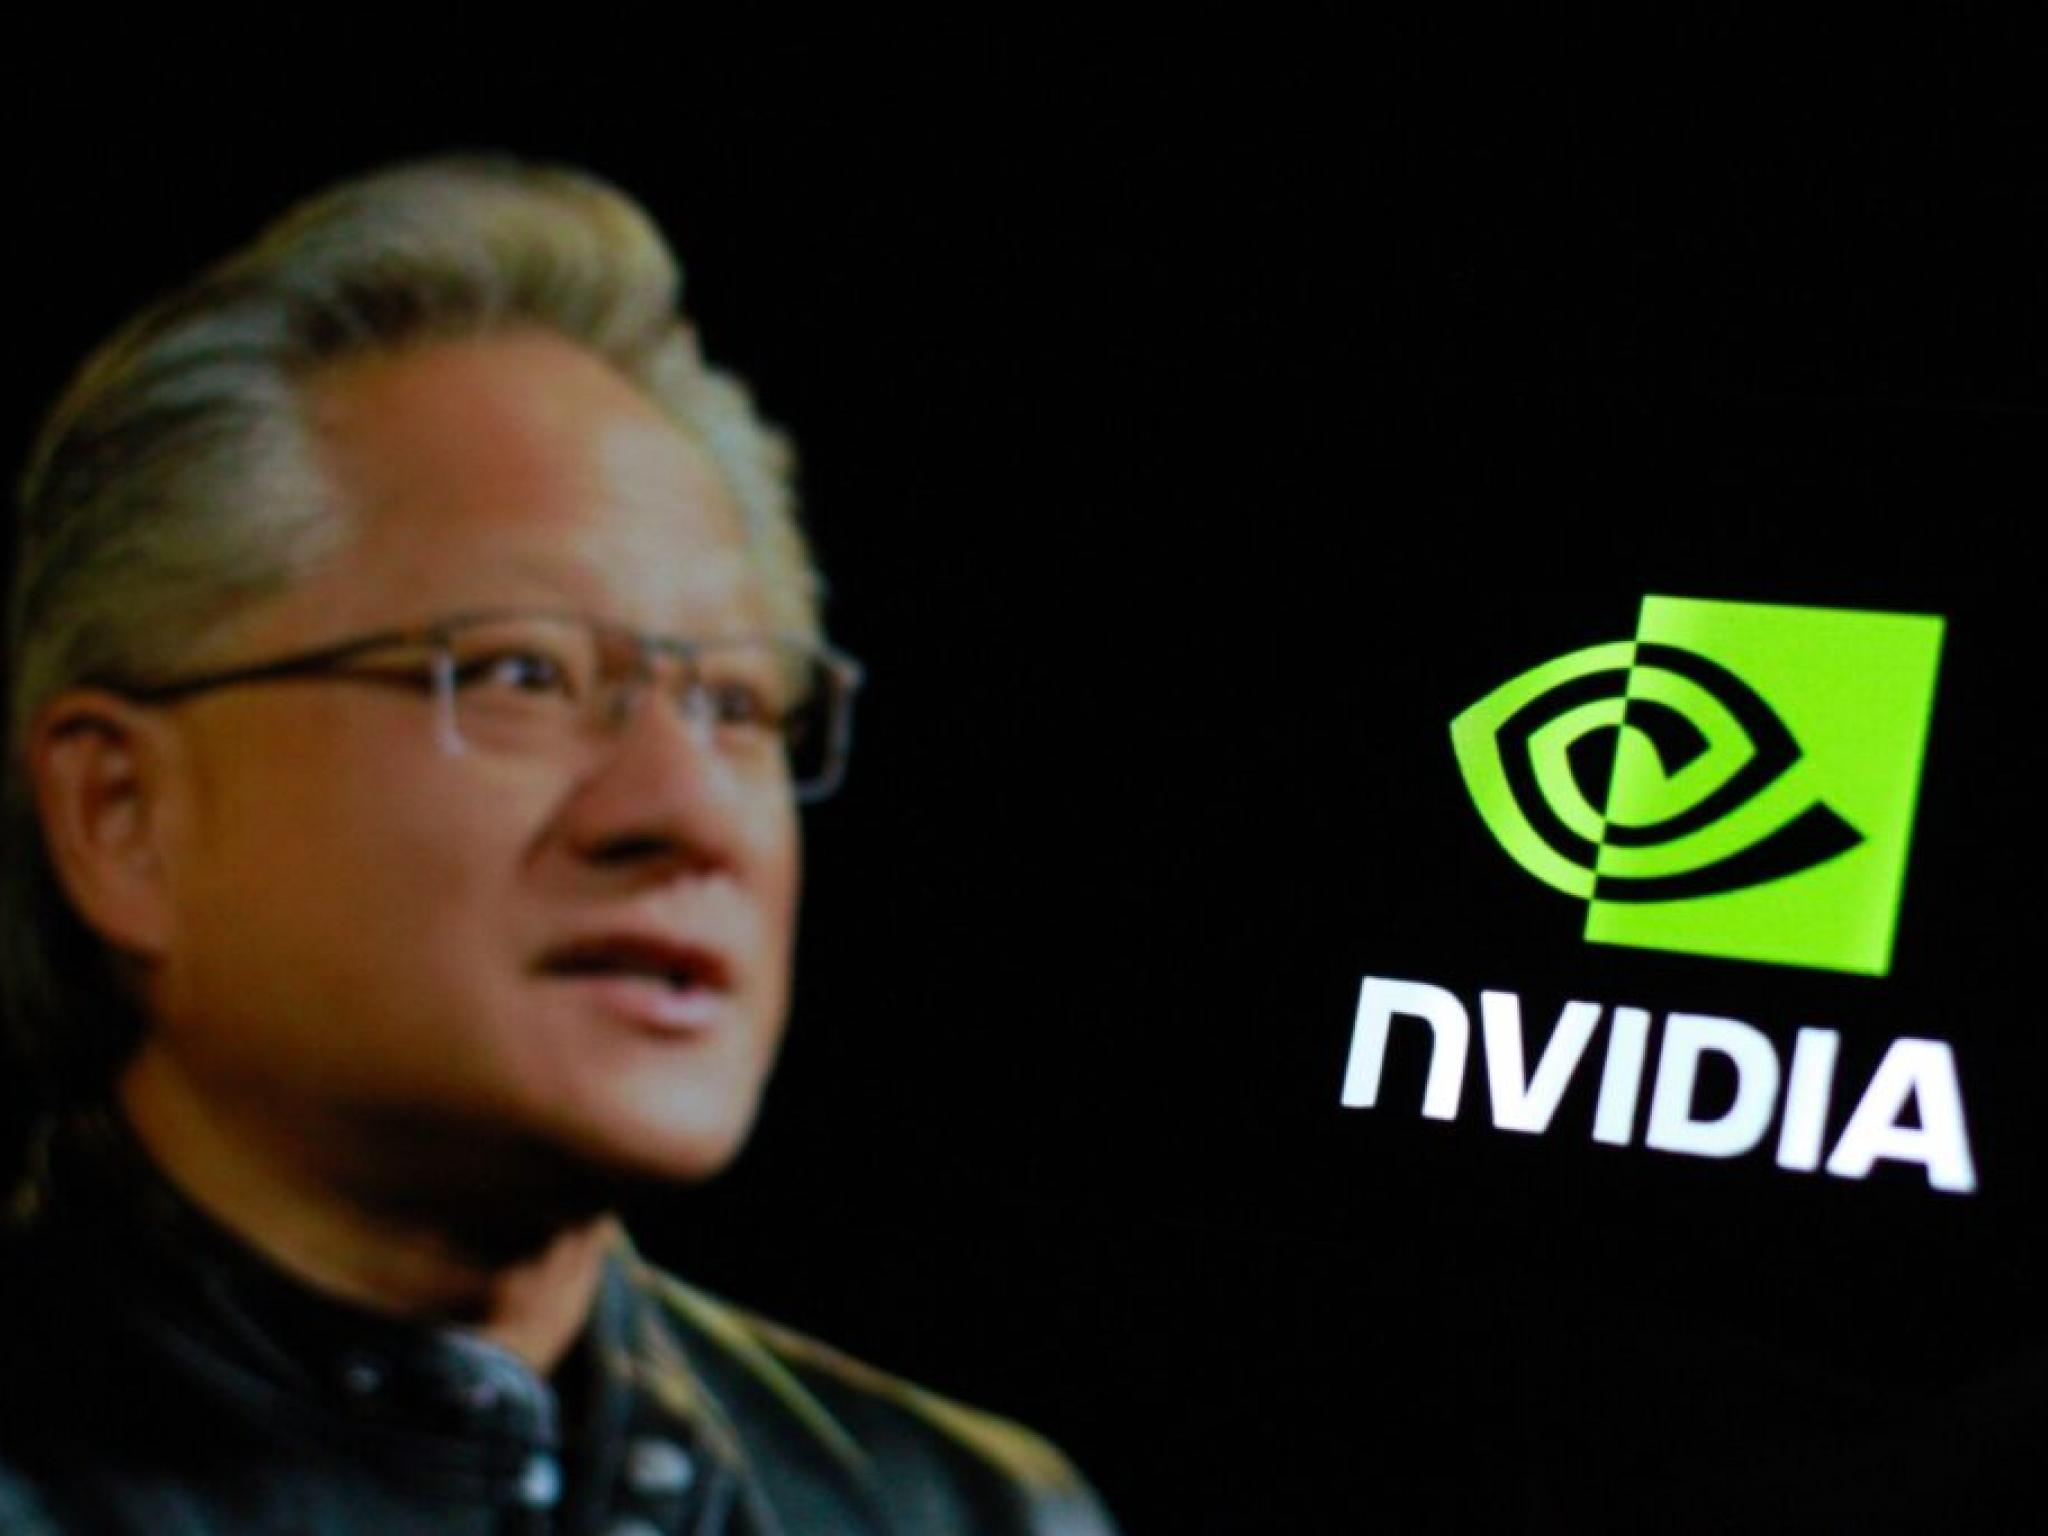  nvidia-investments-shower-retail-investors-with-massive-returns-despite-few-cloudy-days-report 